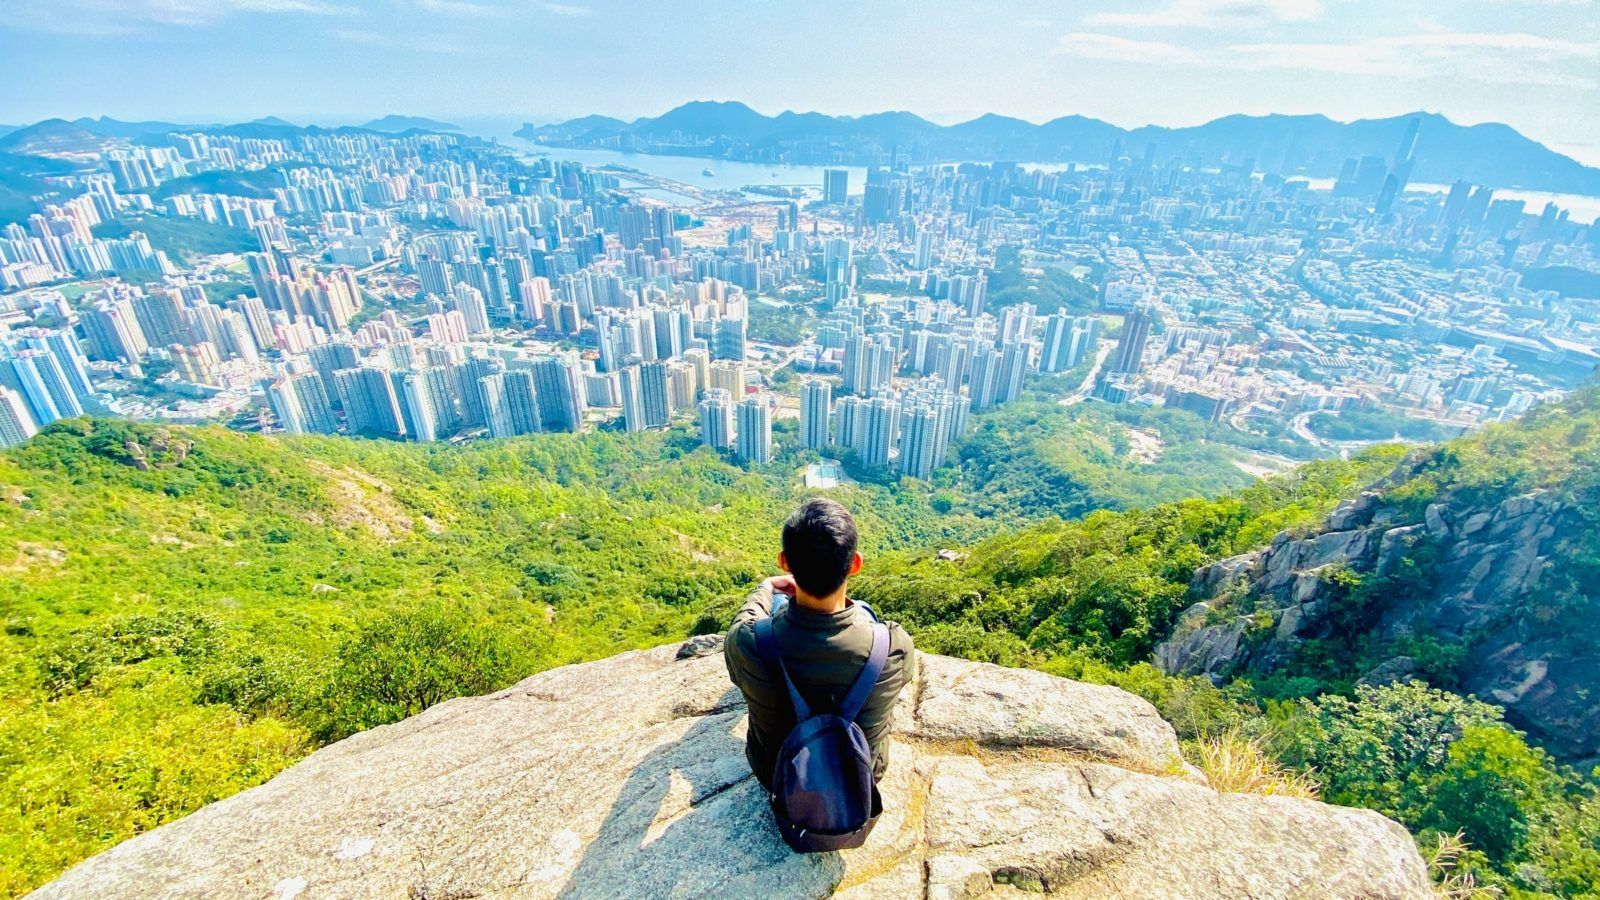 These are Hong Kong’s best hikes with killer views